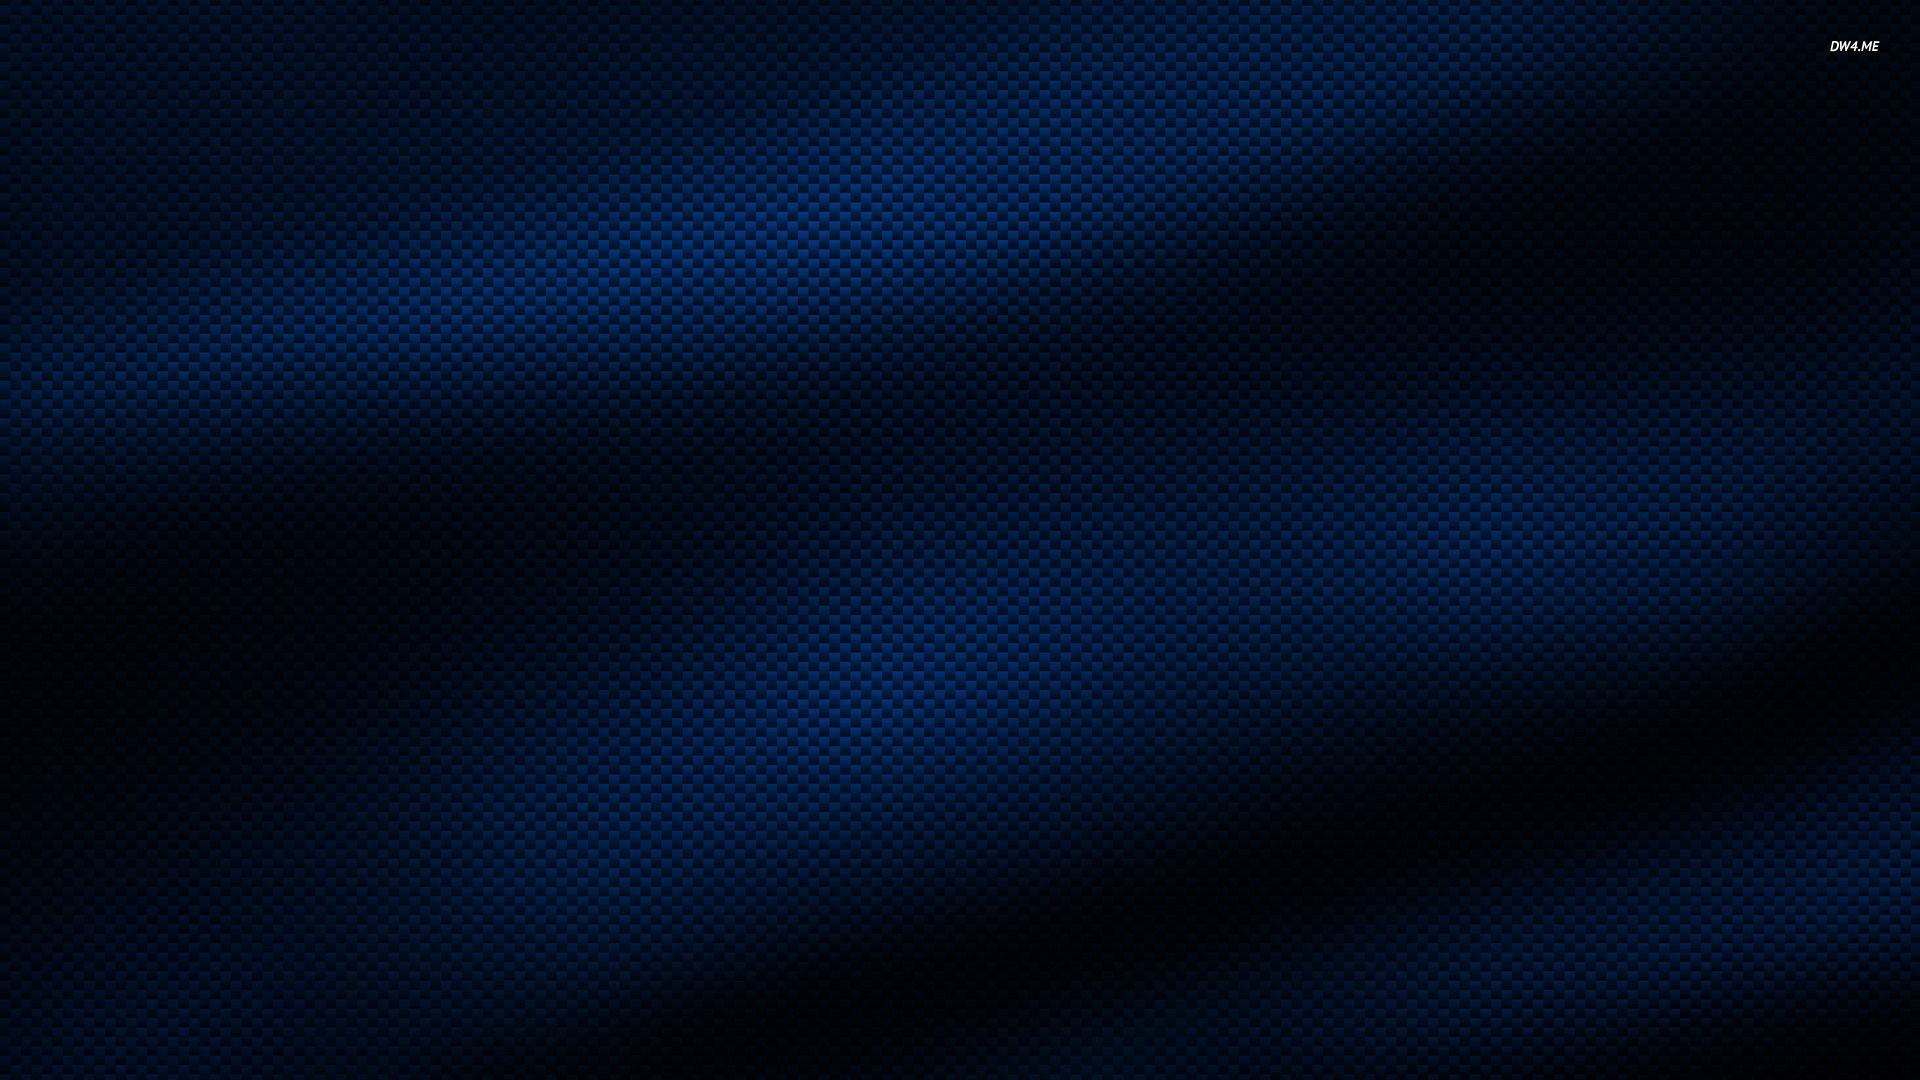 Carbon fiber fabric wallpaper – Abstract wallpapers – #869